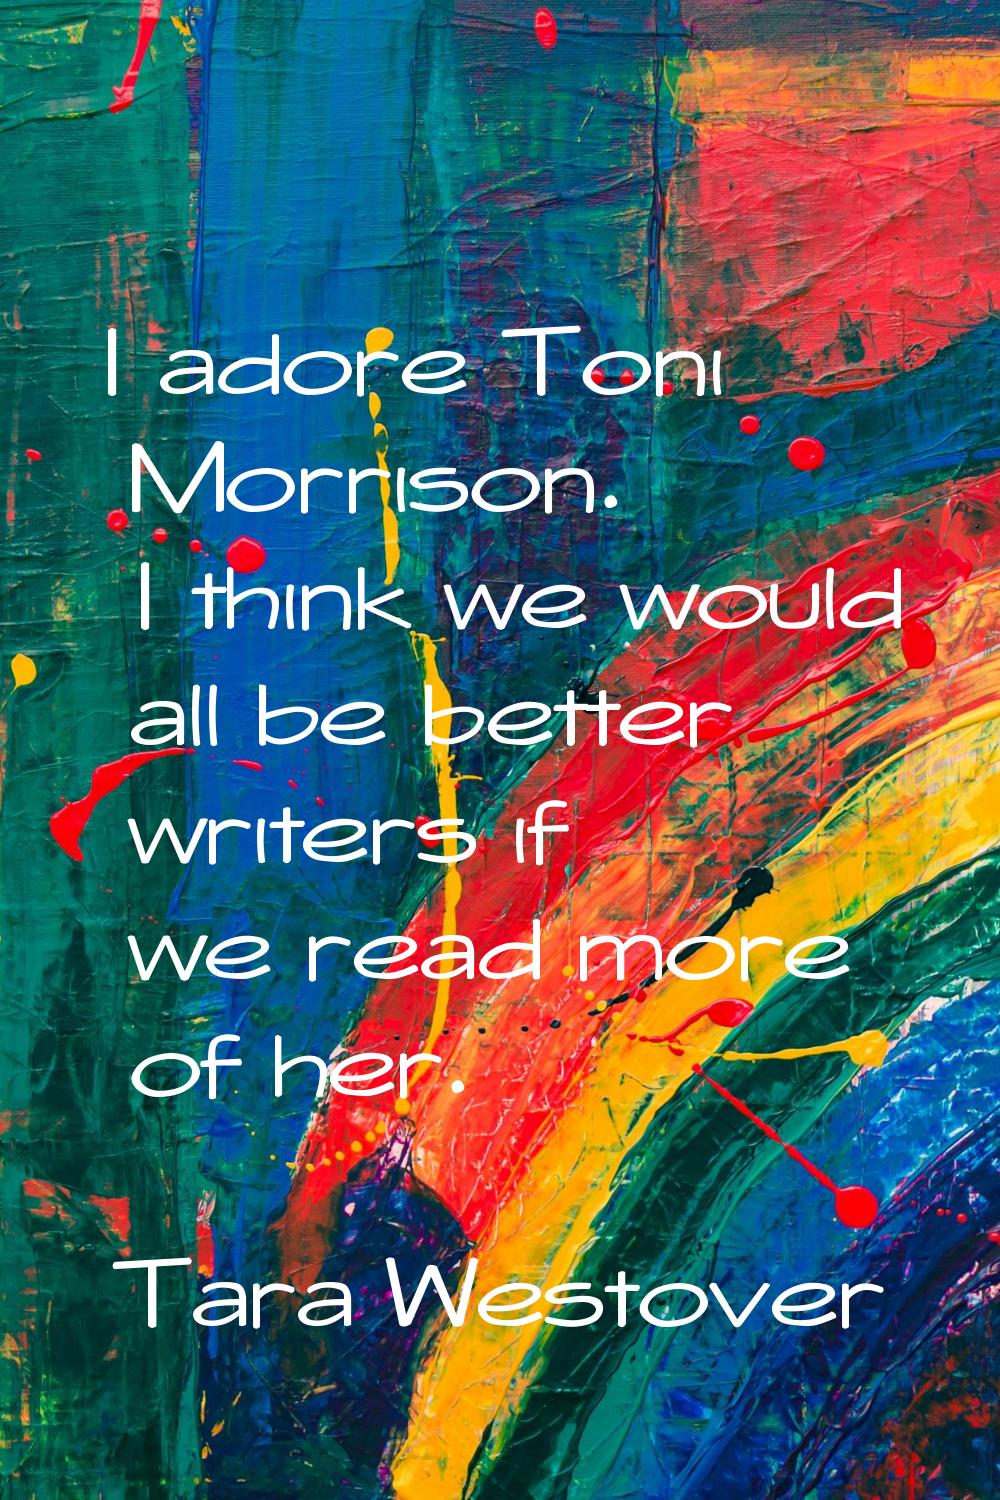 I adore Toni Morrison. I think we would all be better writers if we read more of her.